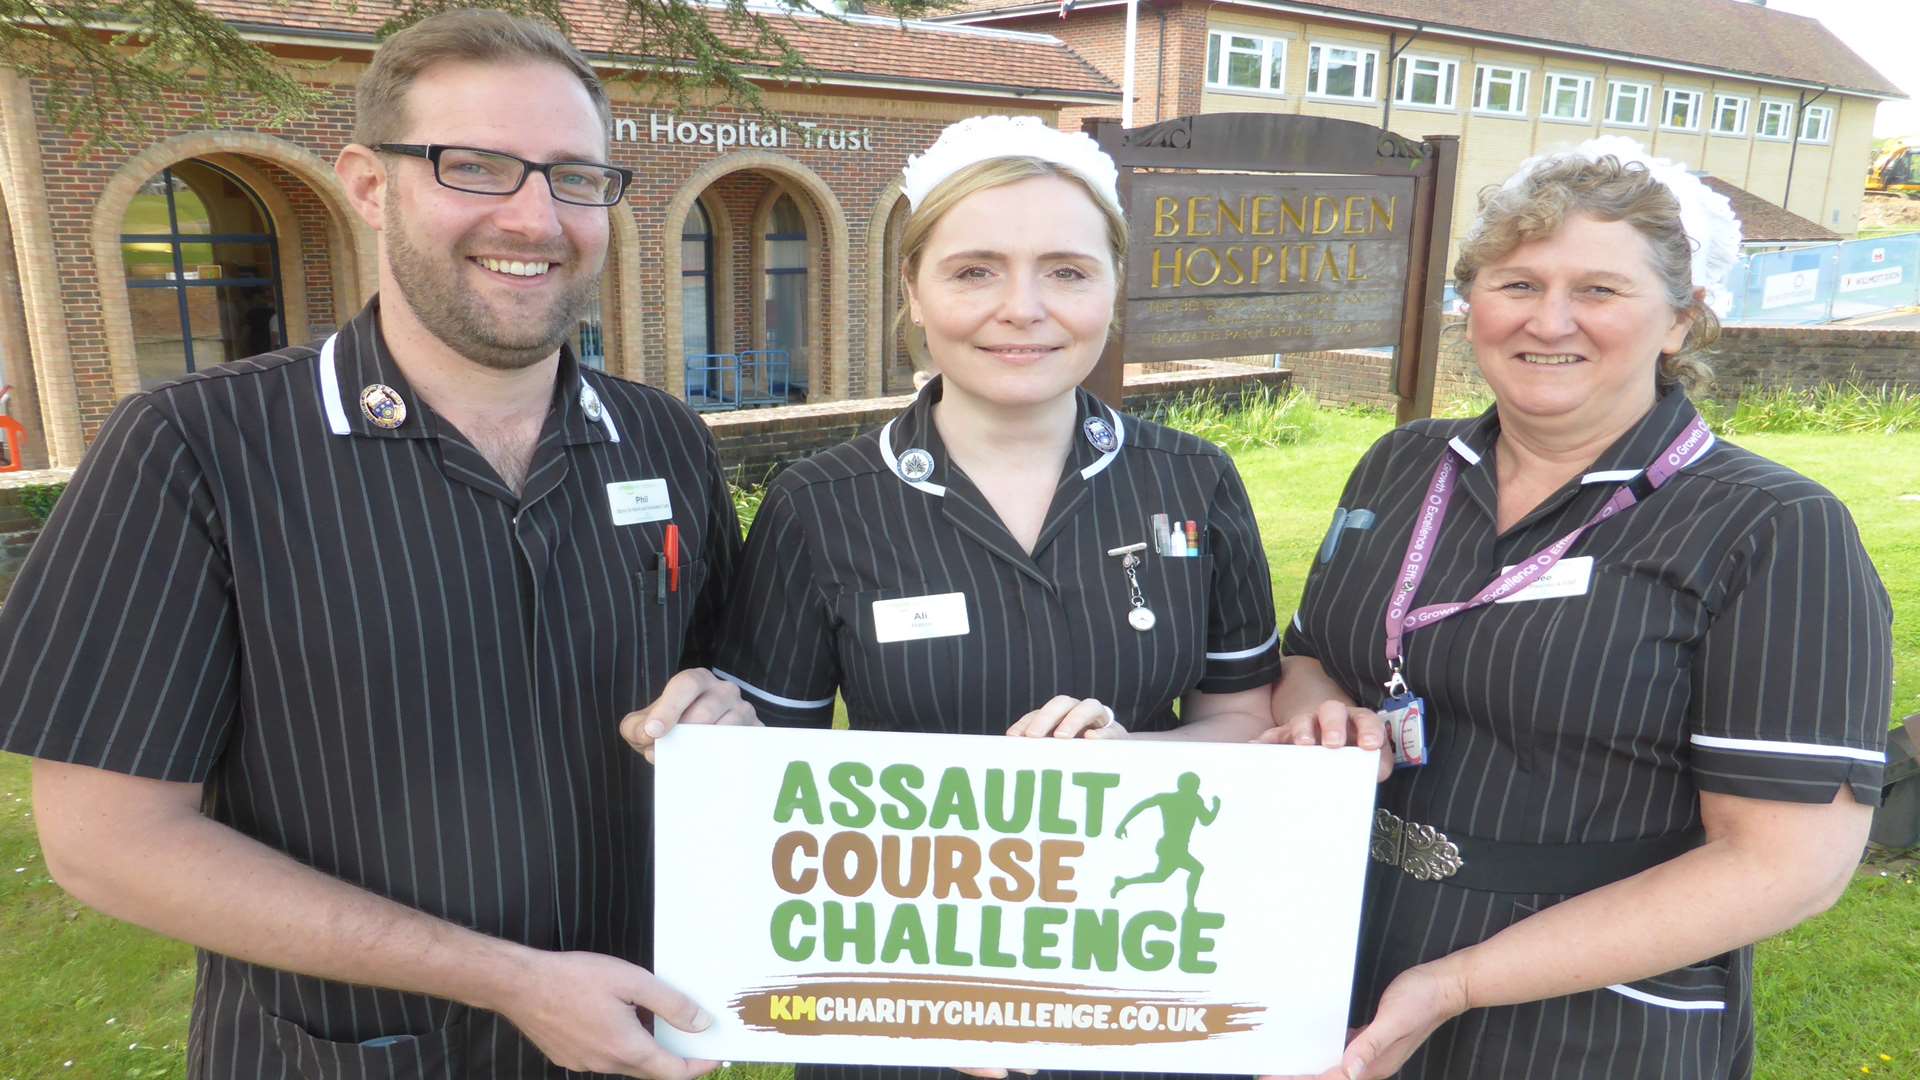 Phil Golding, Ali Curtis and Dee Farris of Benenden Hospital Trust show their support for the KM Assault Course Challenge on Saturday, October 1.